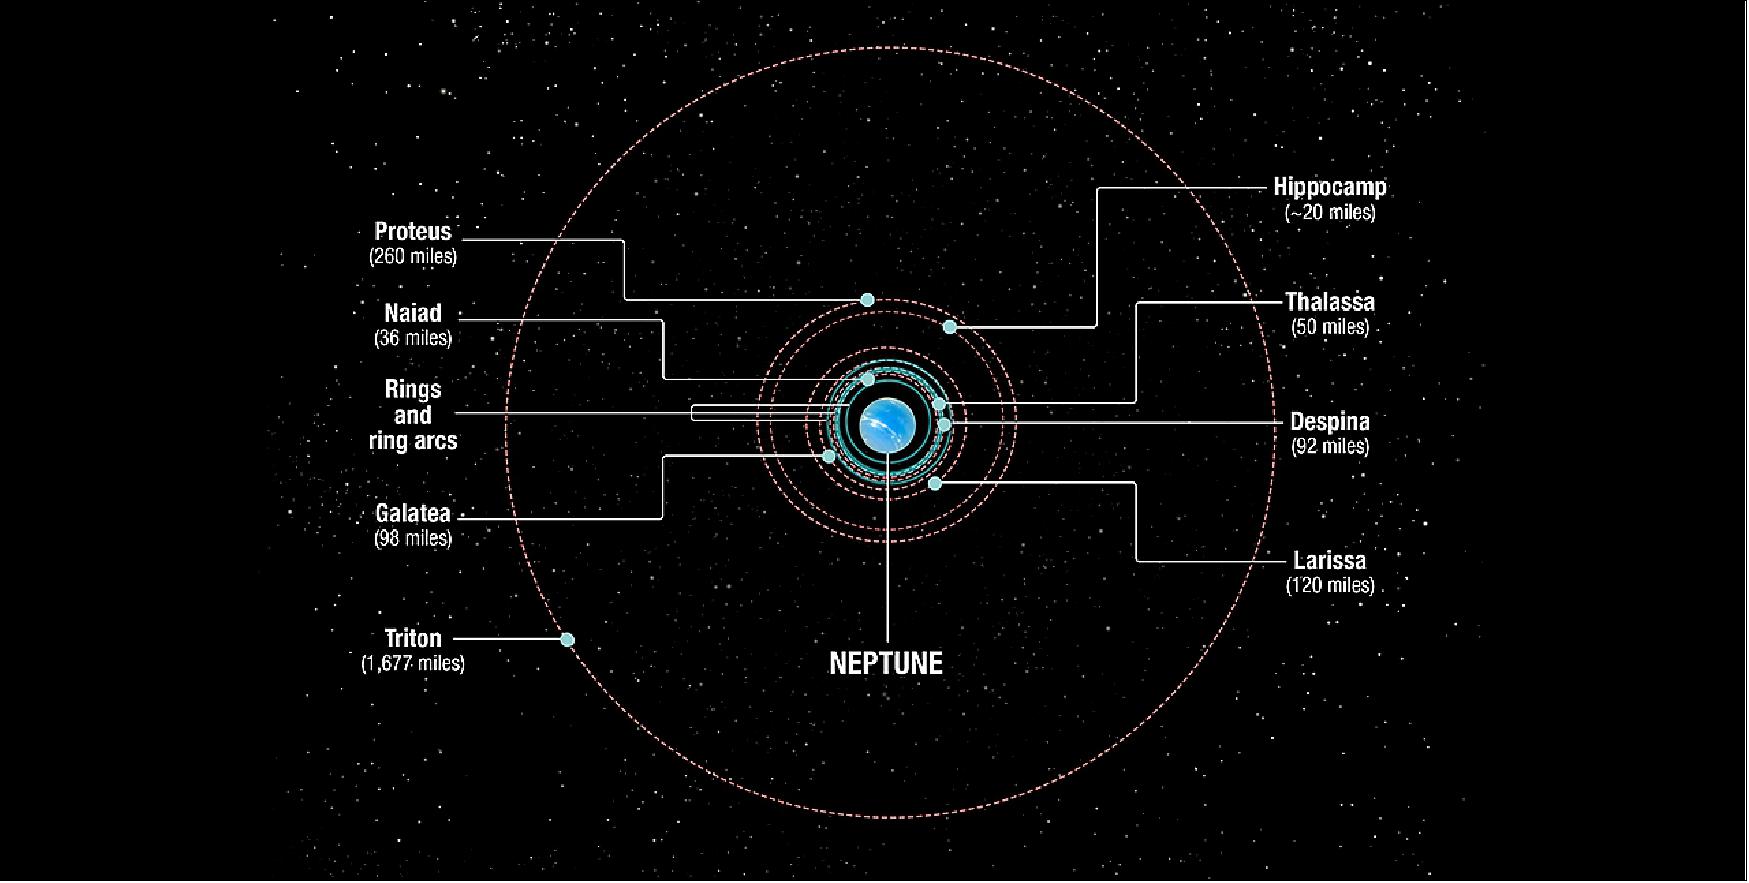 Figure 70: Neptune's inner Moons and their diameters. This diagram shows the orbital positions of Neptune's inner moons, which range in size from 20 to 260 miles across. The outer moon Triton was captured from the Kuiper belt many billions of years ago. This would have torn up Neptune's original satellite system. Triton settled into a circular orbit and the debris from shattered moons re-coalesced into a second generation of inner satellites seen today. However, comet bombardment continued to tear things up, leading to the birth of Hippocamp, which is a broken-off piece of Proteus. Therefore, it is a third-generation satellite. Not shown is Neptune's outermost known satellite, Nereid, which is in a highly eccentric orbit, and may be a survivor from the era of that Triton capture [image credit: NASA, ESA, and A. Feild (STScI)]